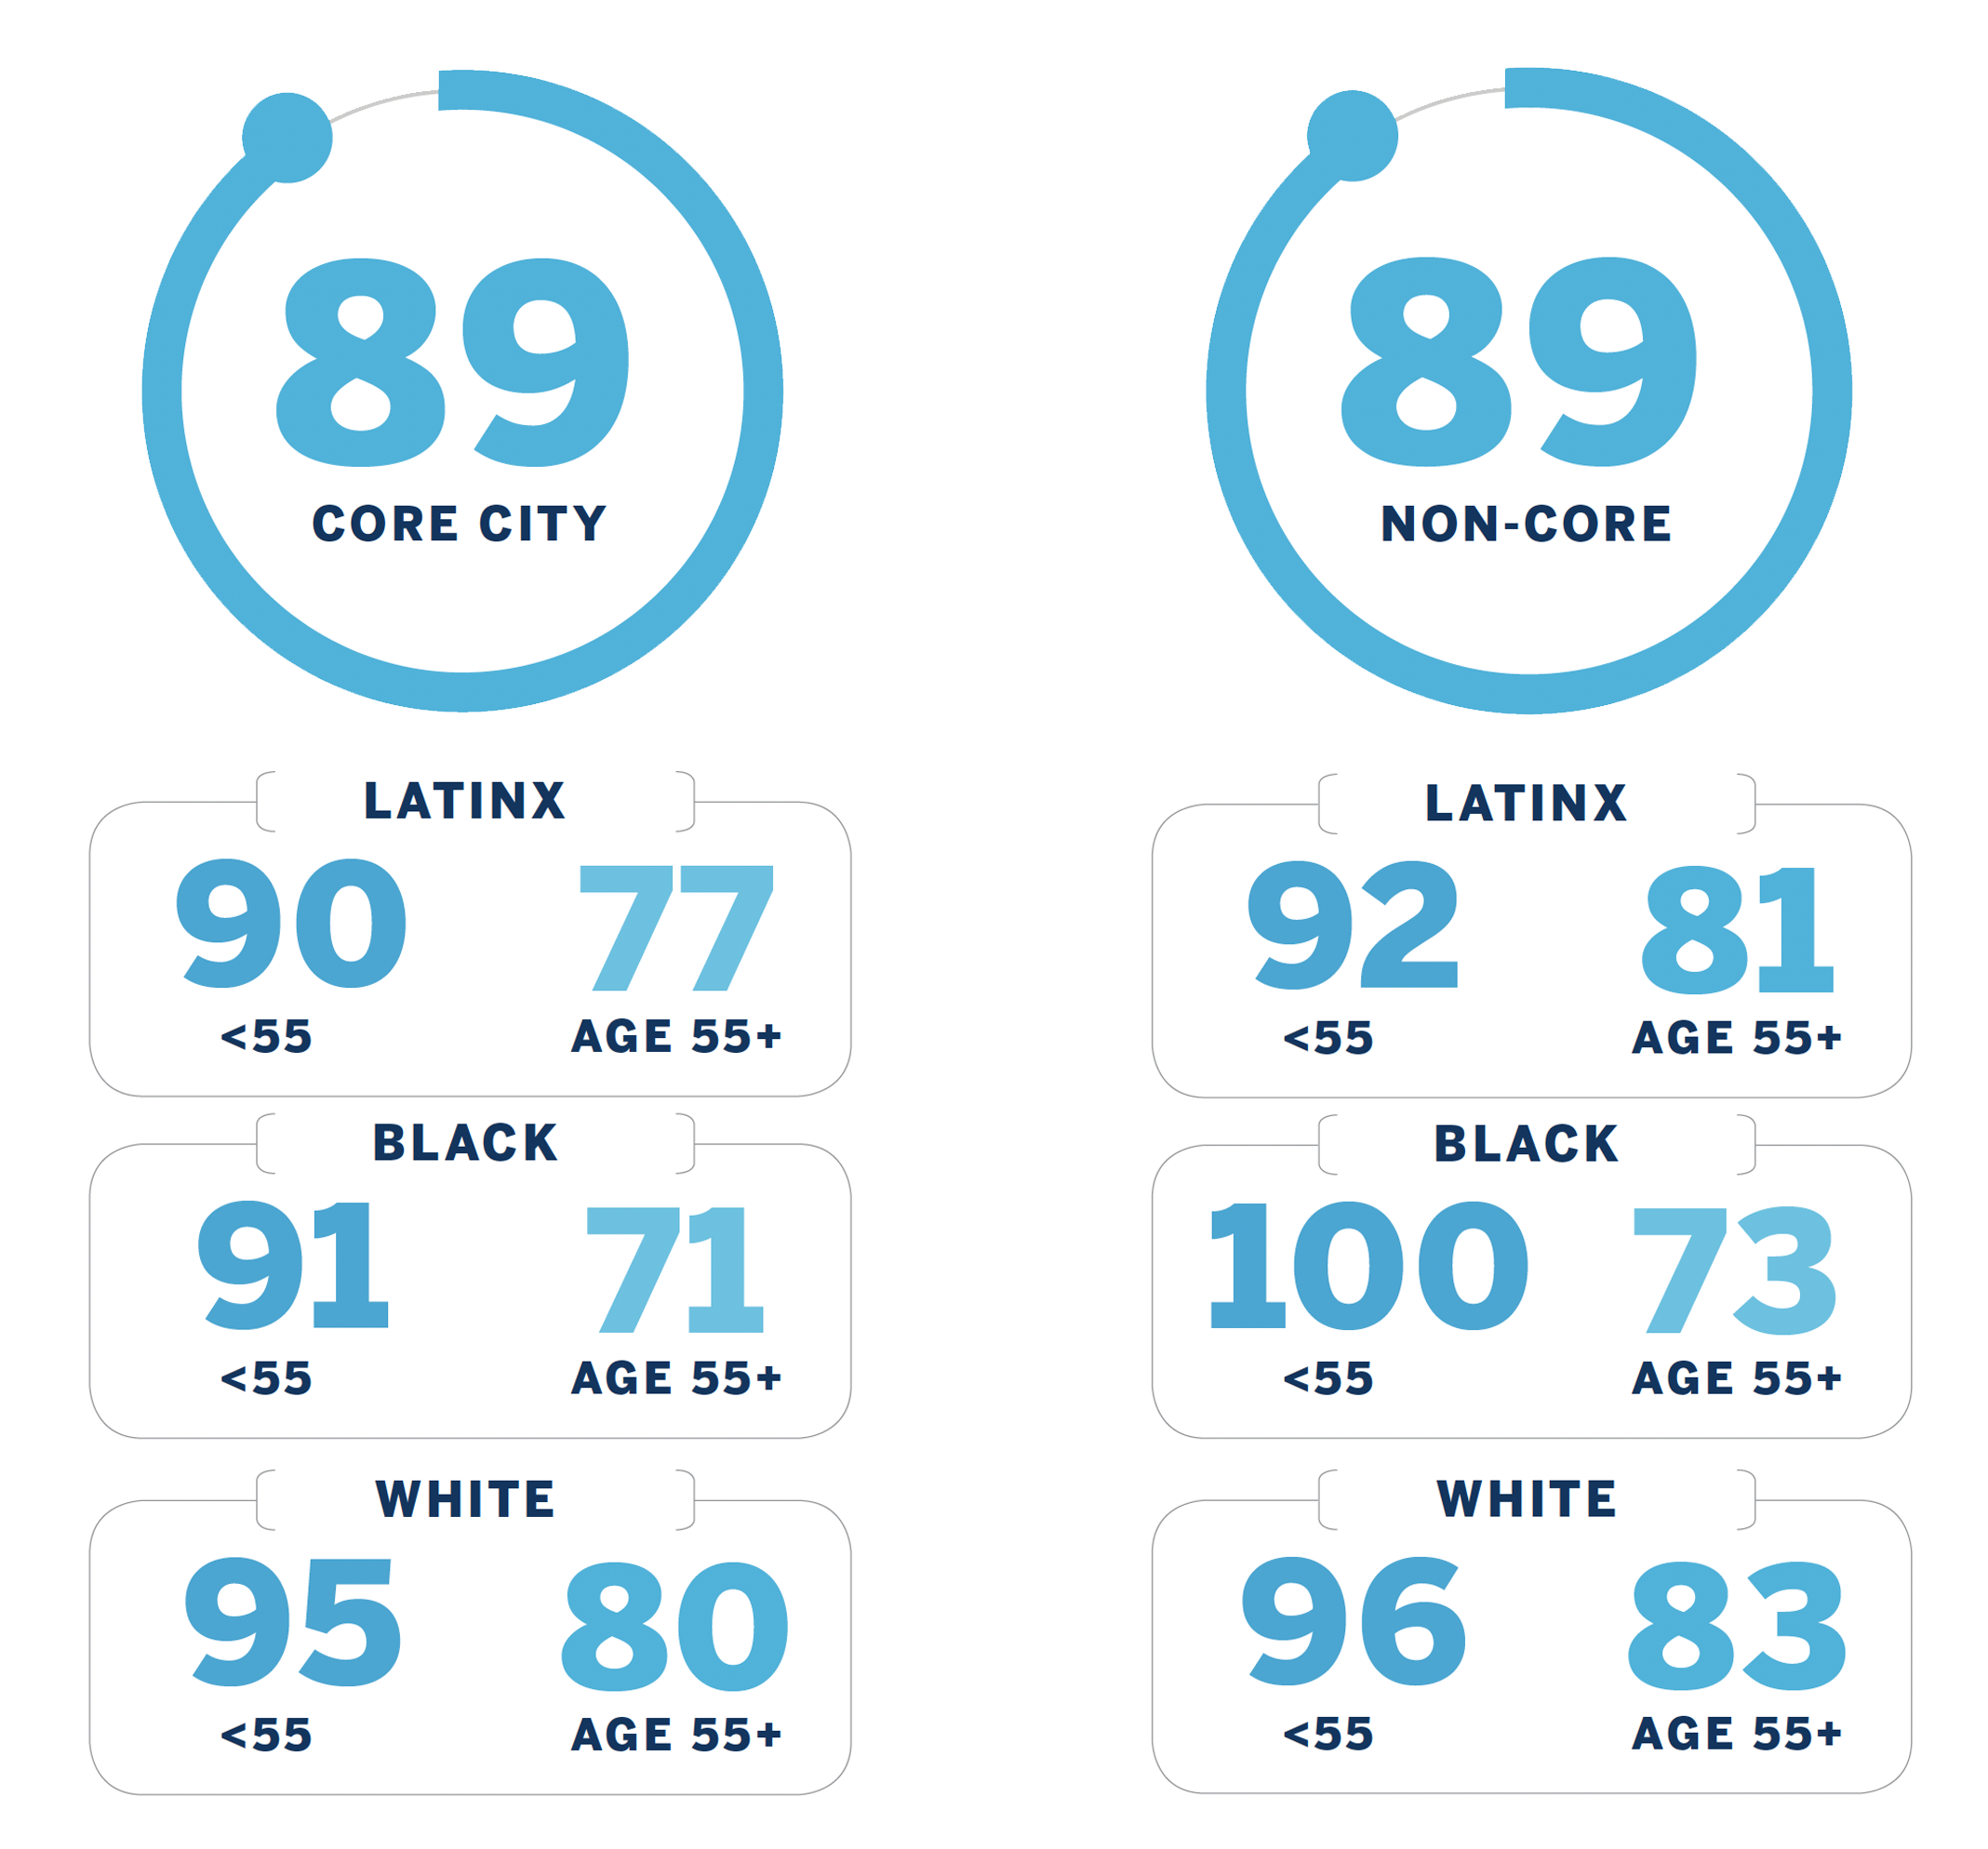 Chart breakdown: Core City: 89 (broken down by Latinx, Black, and White ages less than and over 55) Non-Core: 89 (broken down by Latinx, Black, and White ages less than and over 55)